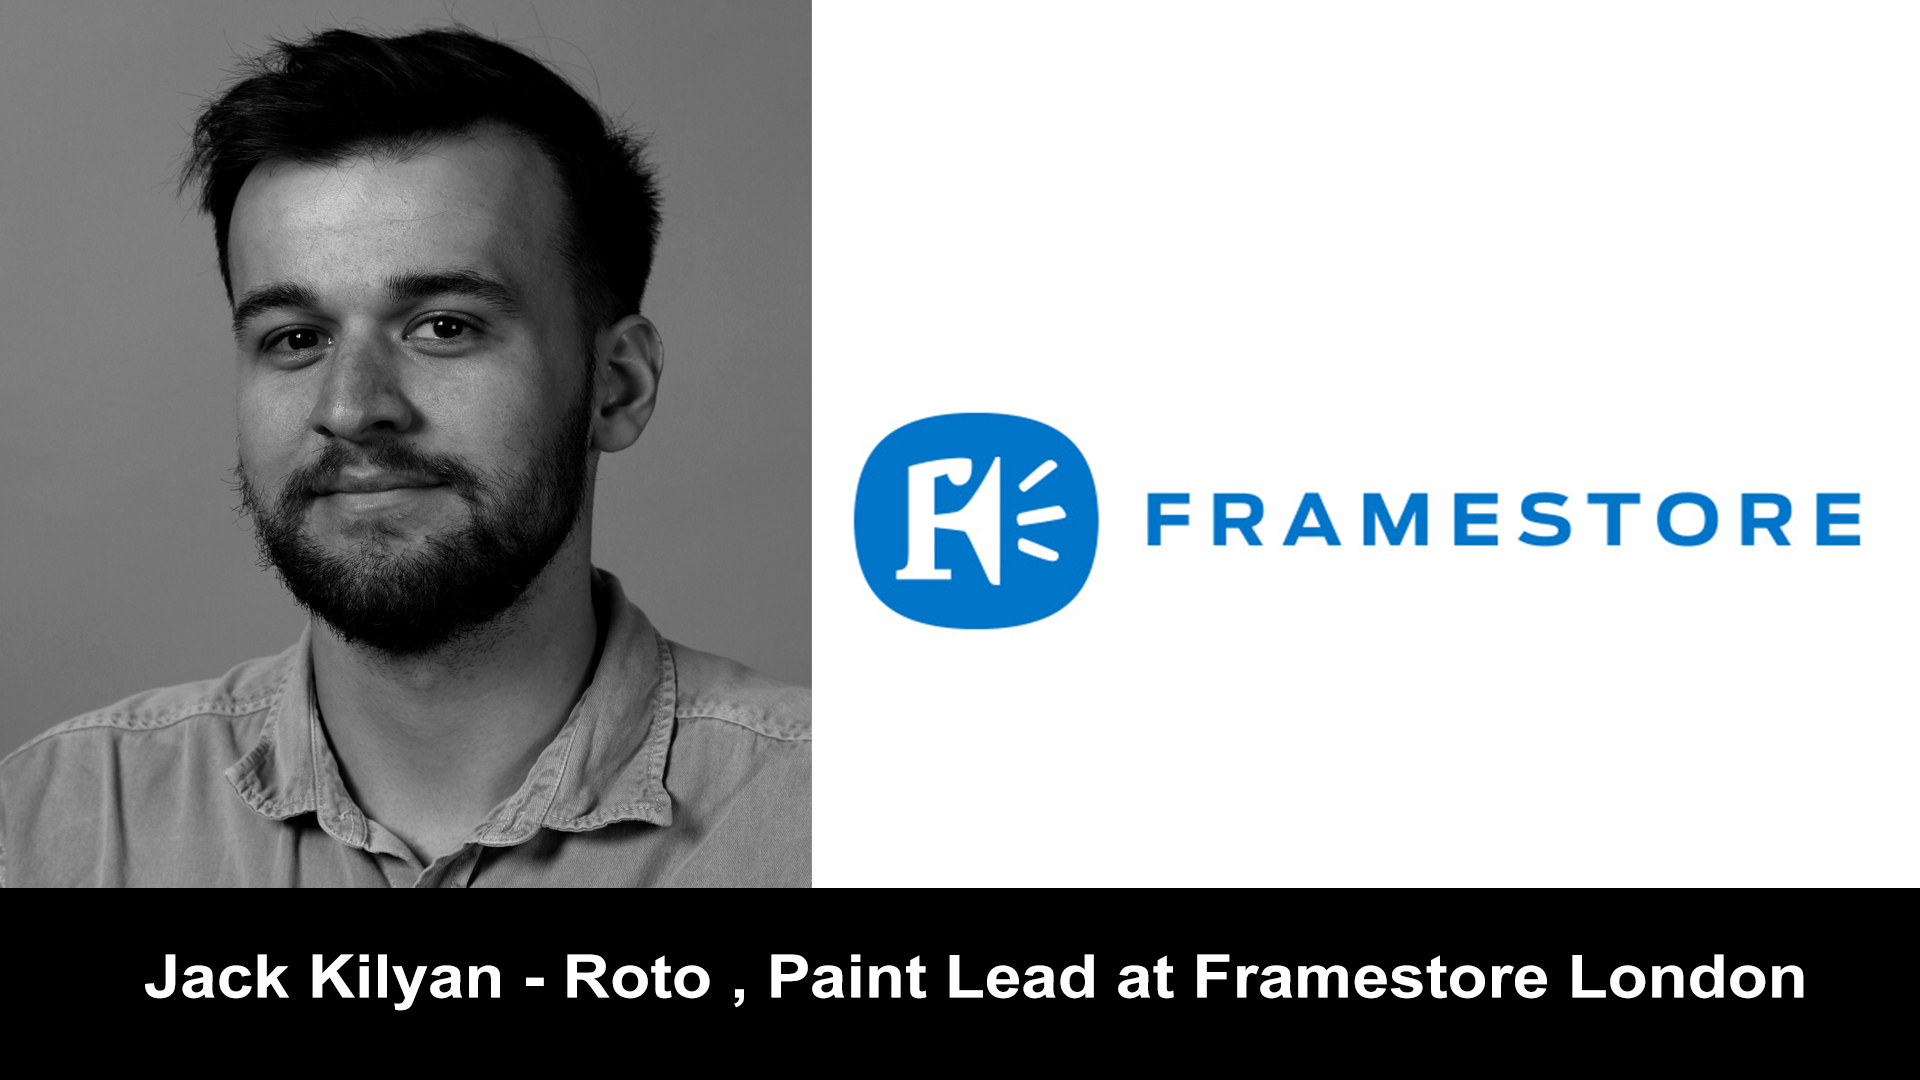 Interview With Jack Kilyan, Roto/Paint Lead at Framestore London